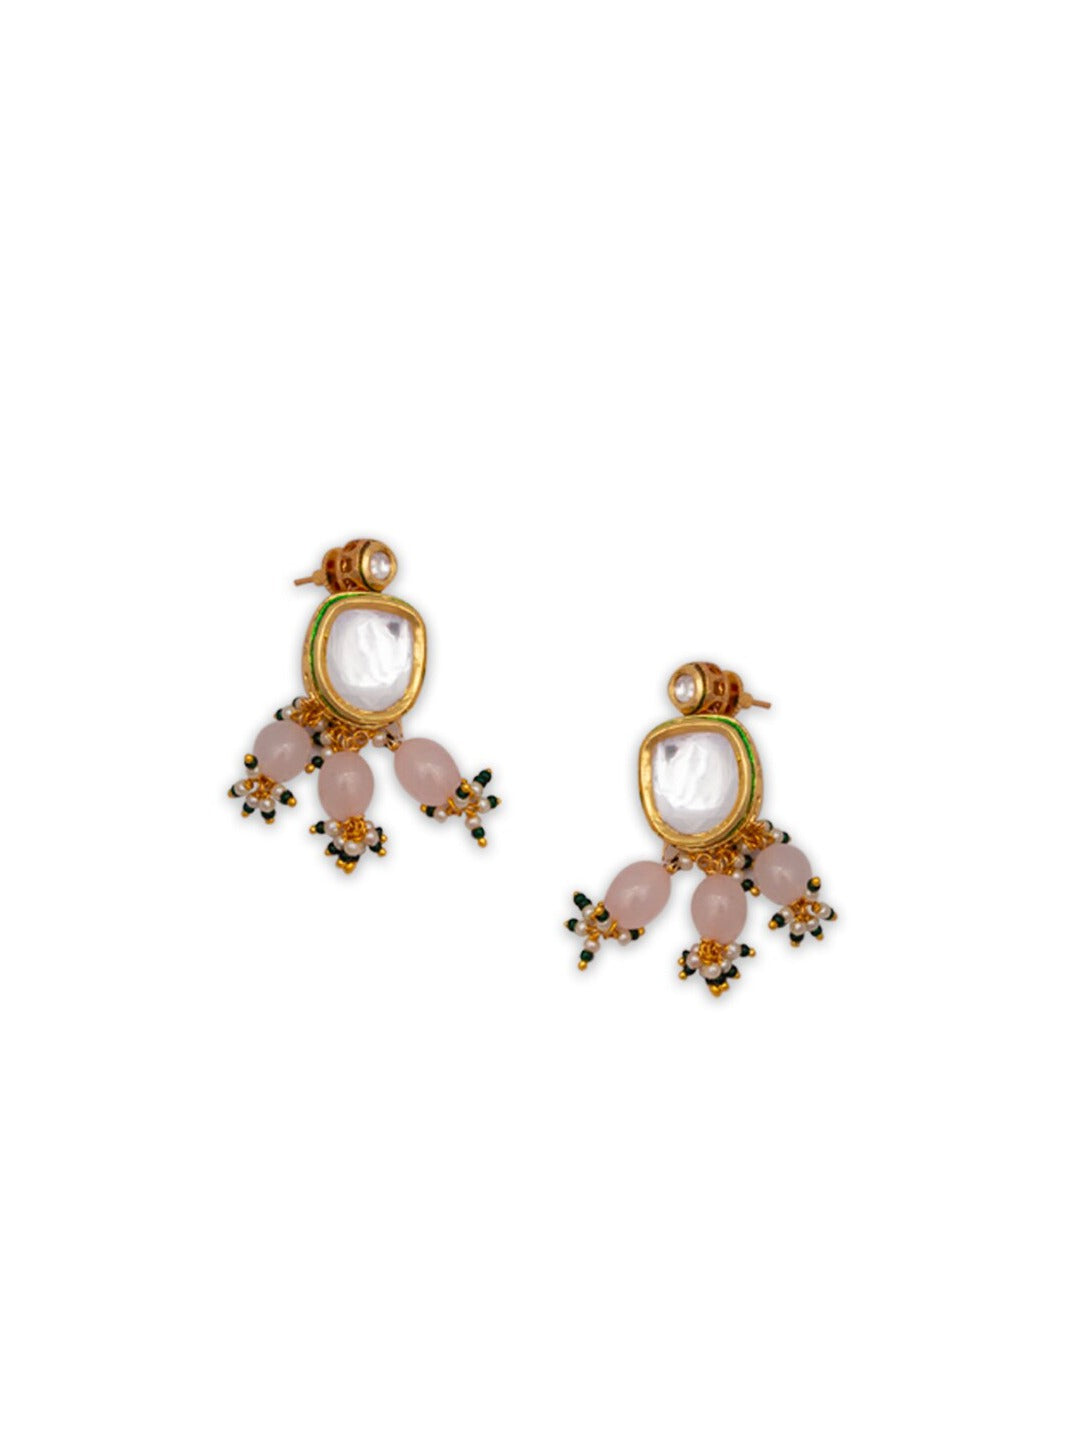 Women's Gold-Plated Handcrafted Kundan Jewellery Set - Morkanth